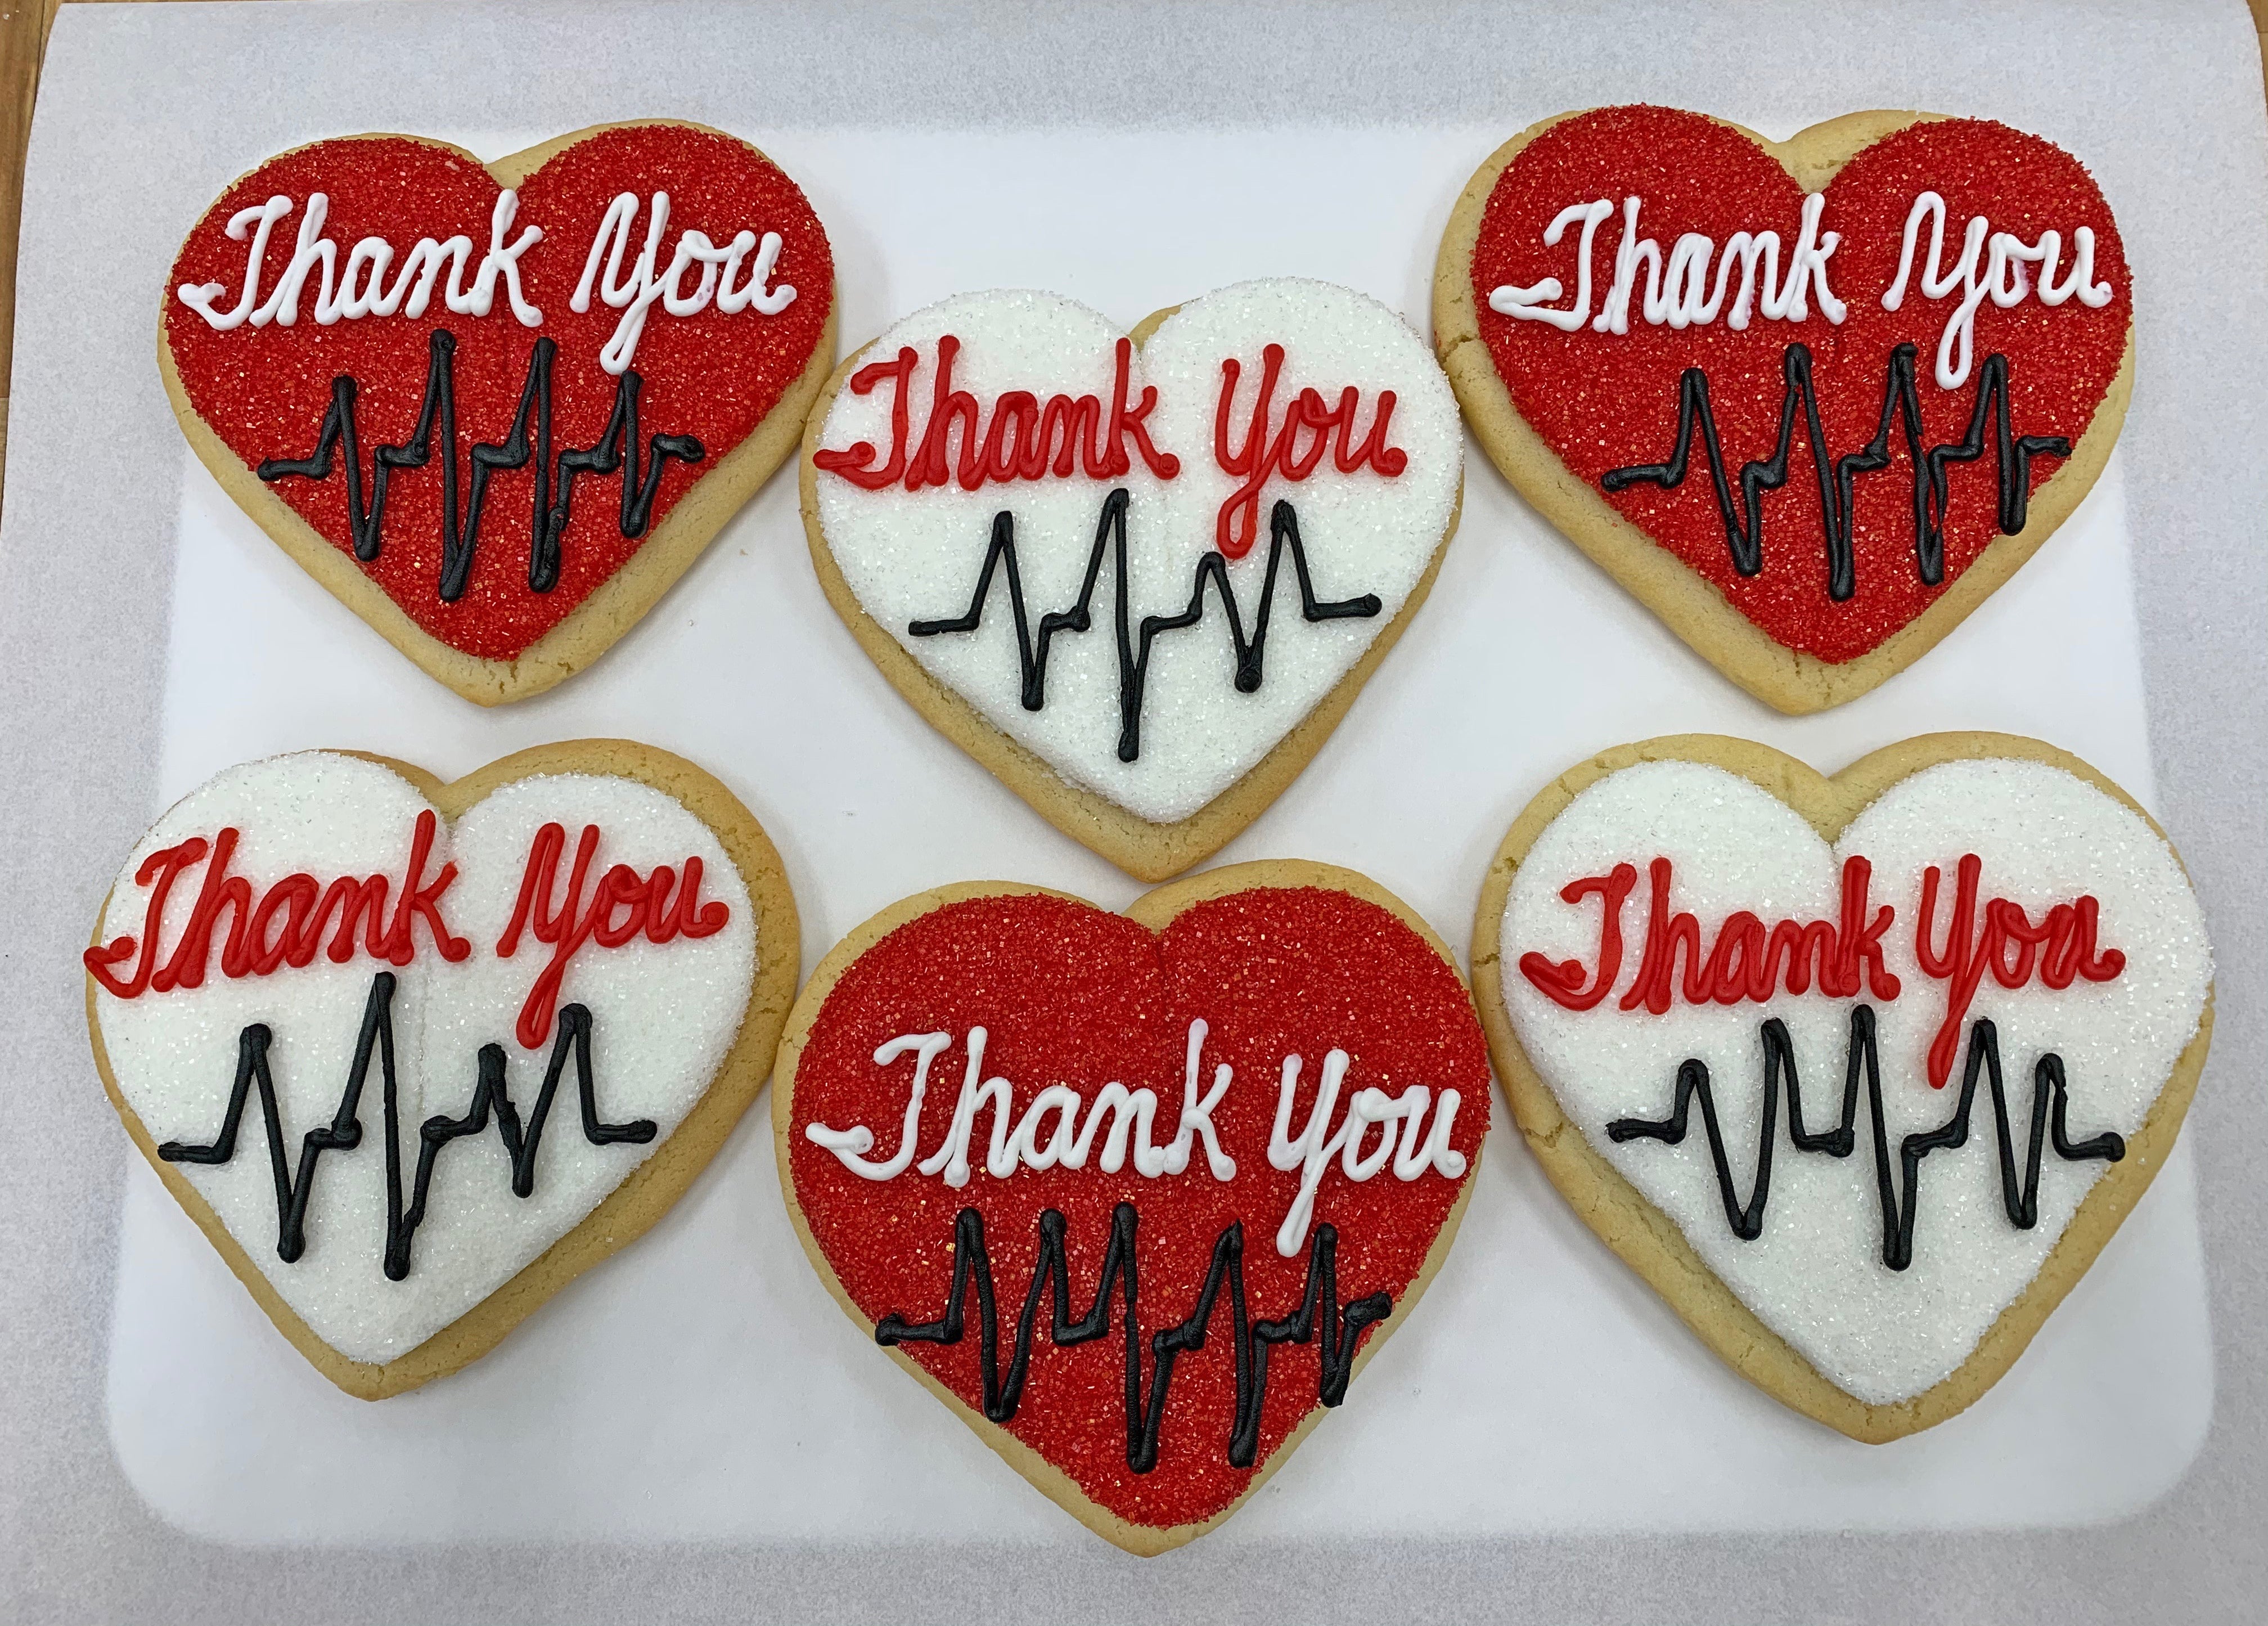 A Dozen Decorated "Thank You" Cookies